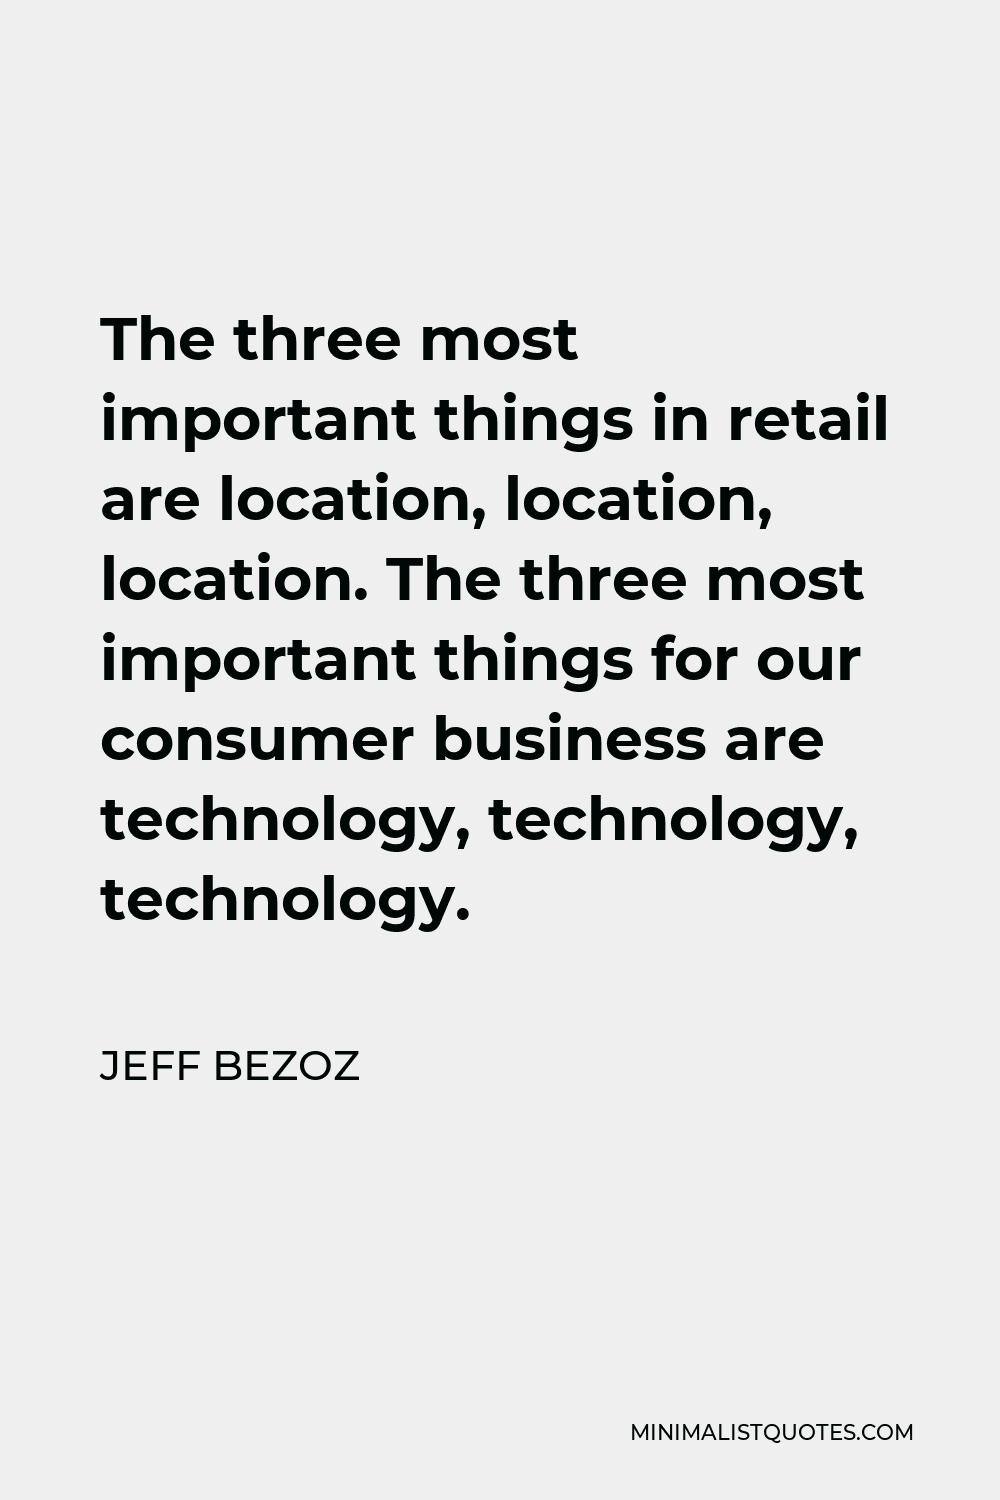 Jeff Bezoz Quote - The three most important things in retail are location, location, location. The three most important things for our consumer business are technology, technology, technology.